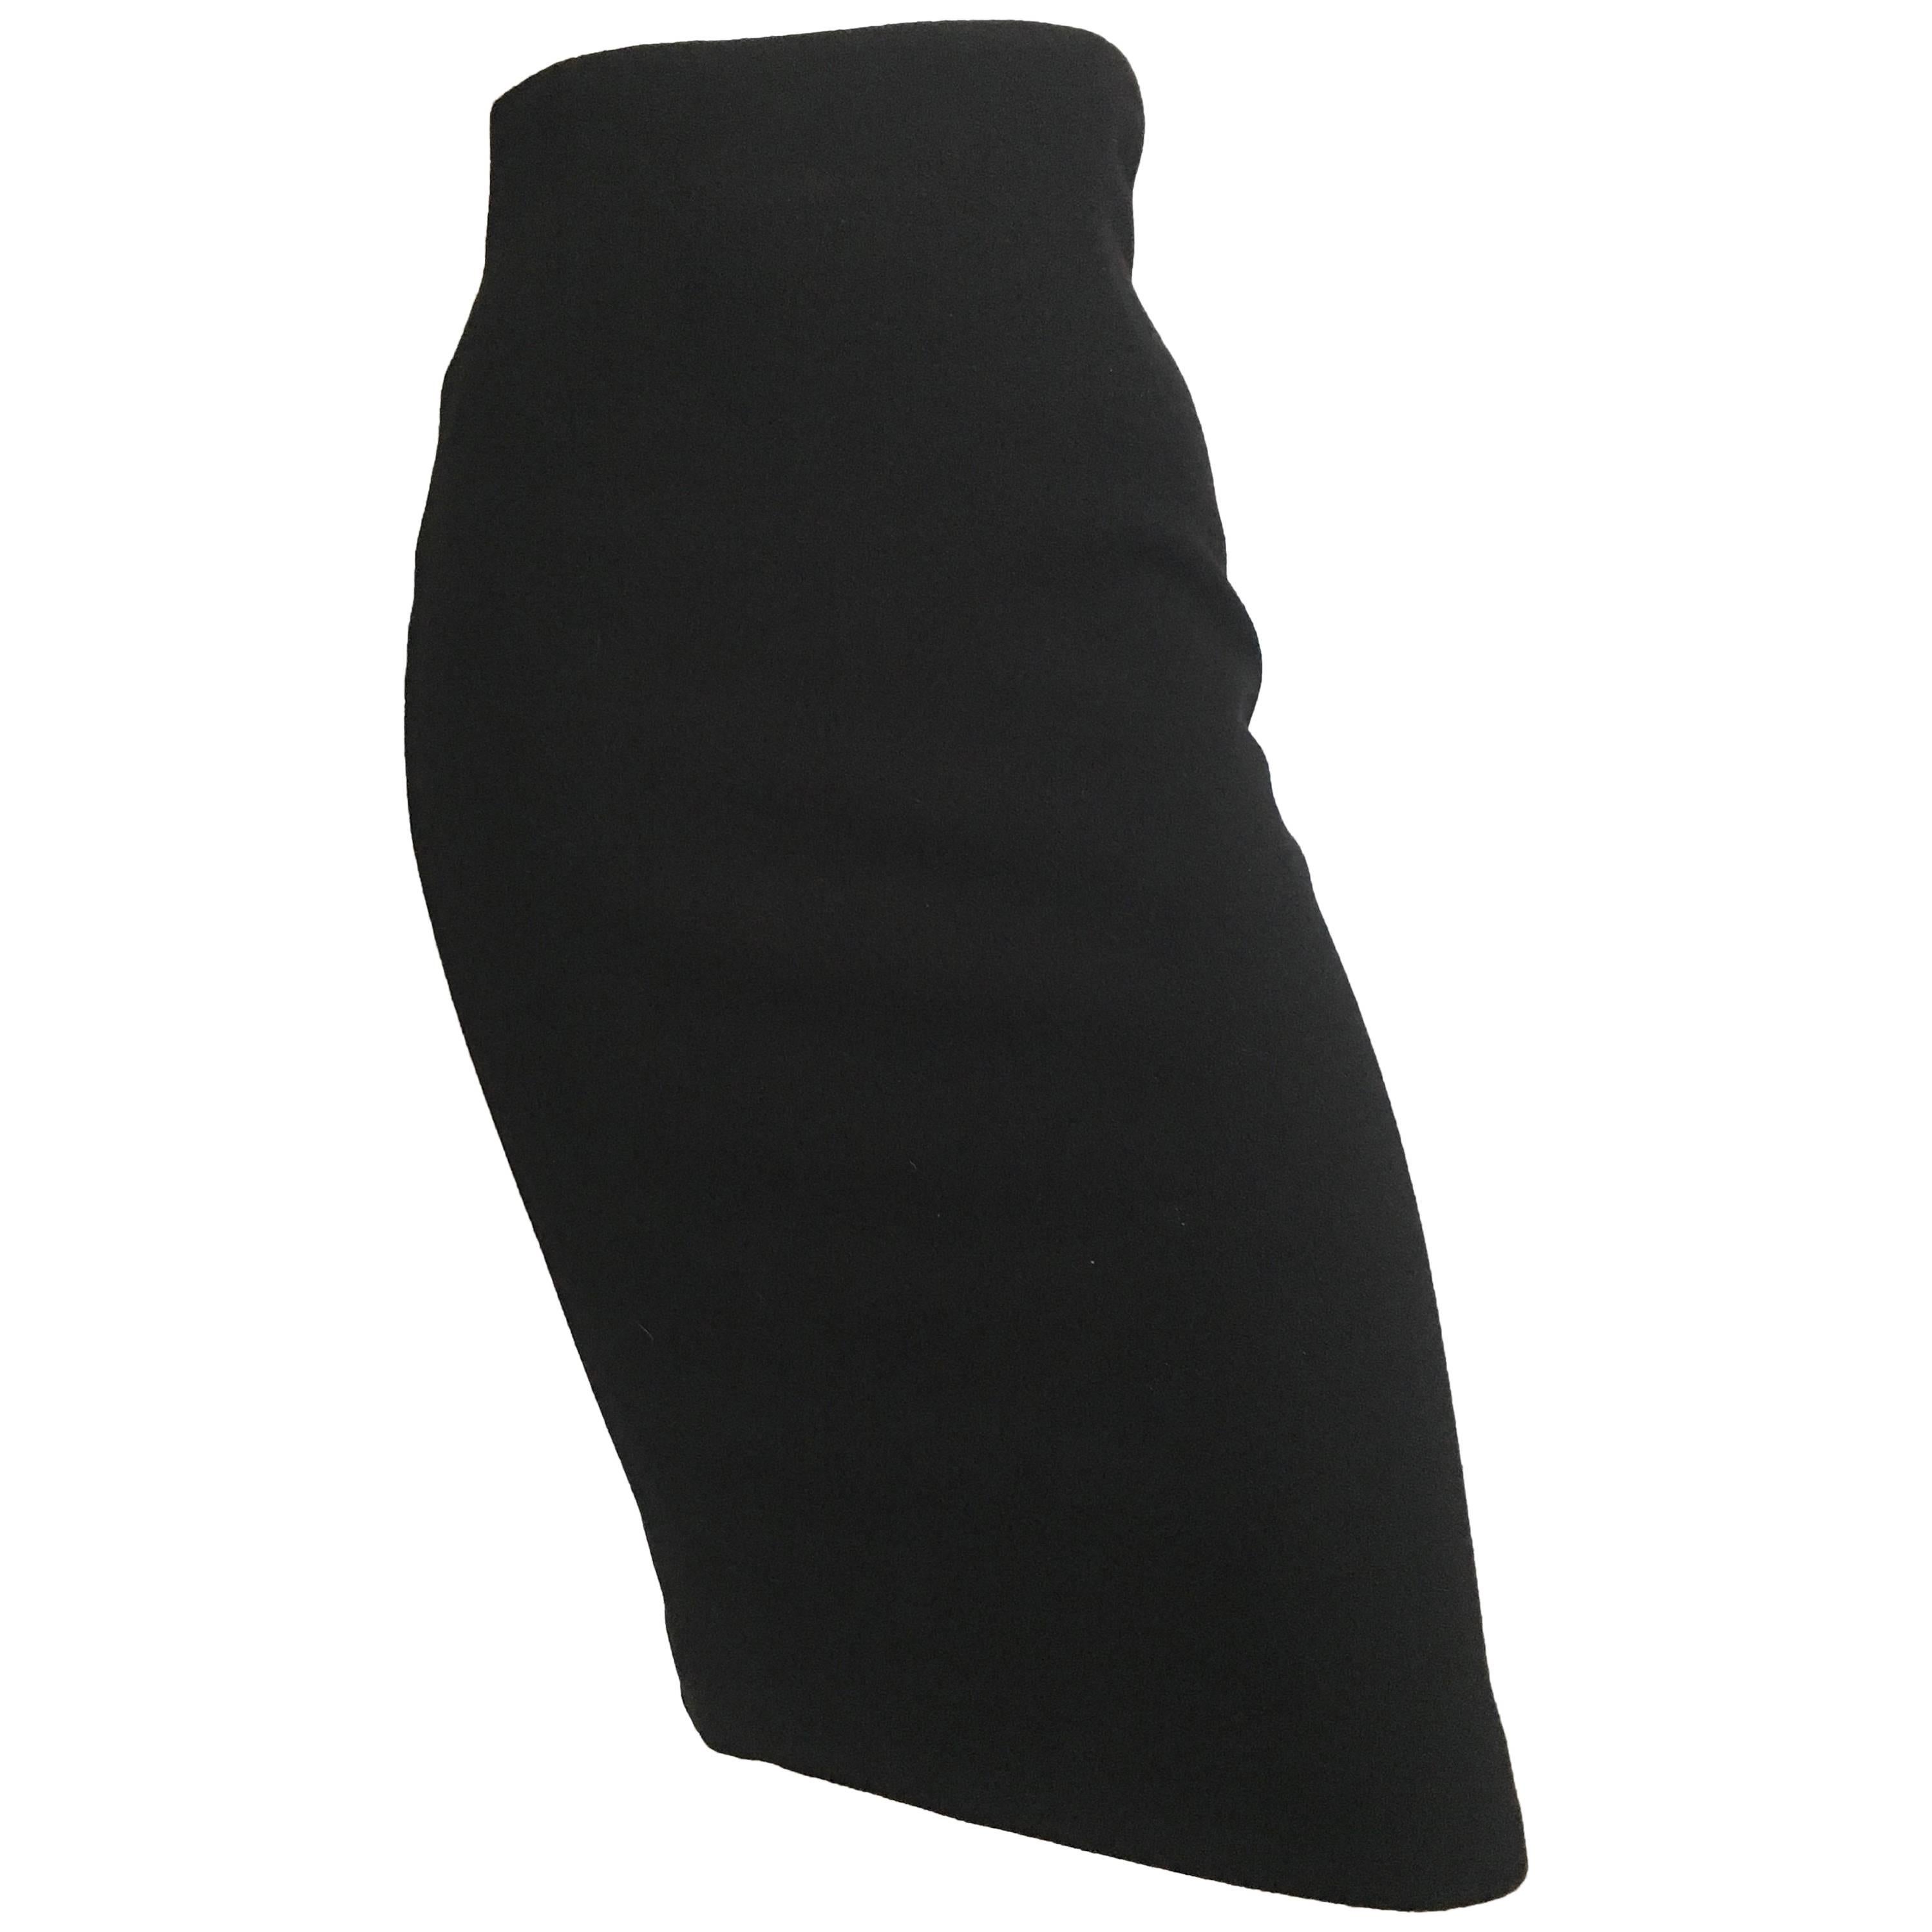 Ralph Lauren Collection Black Wool Pencil Skirt Size 2/4. For Sale